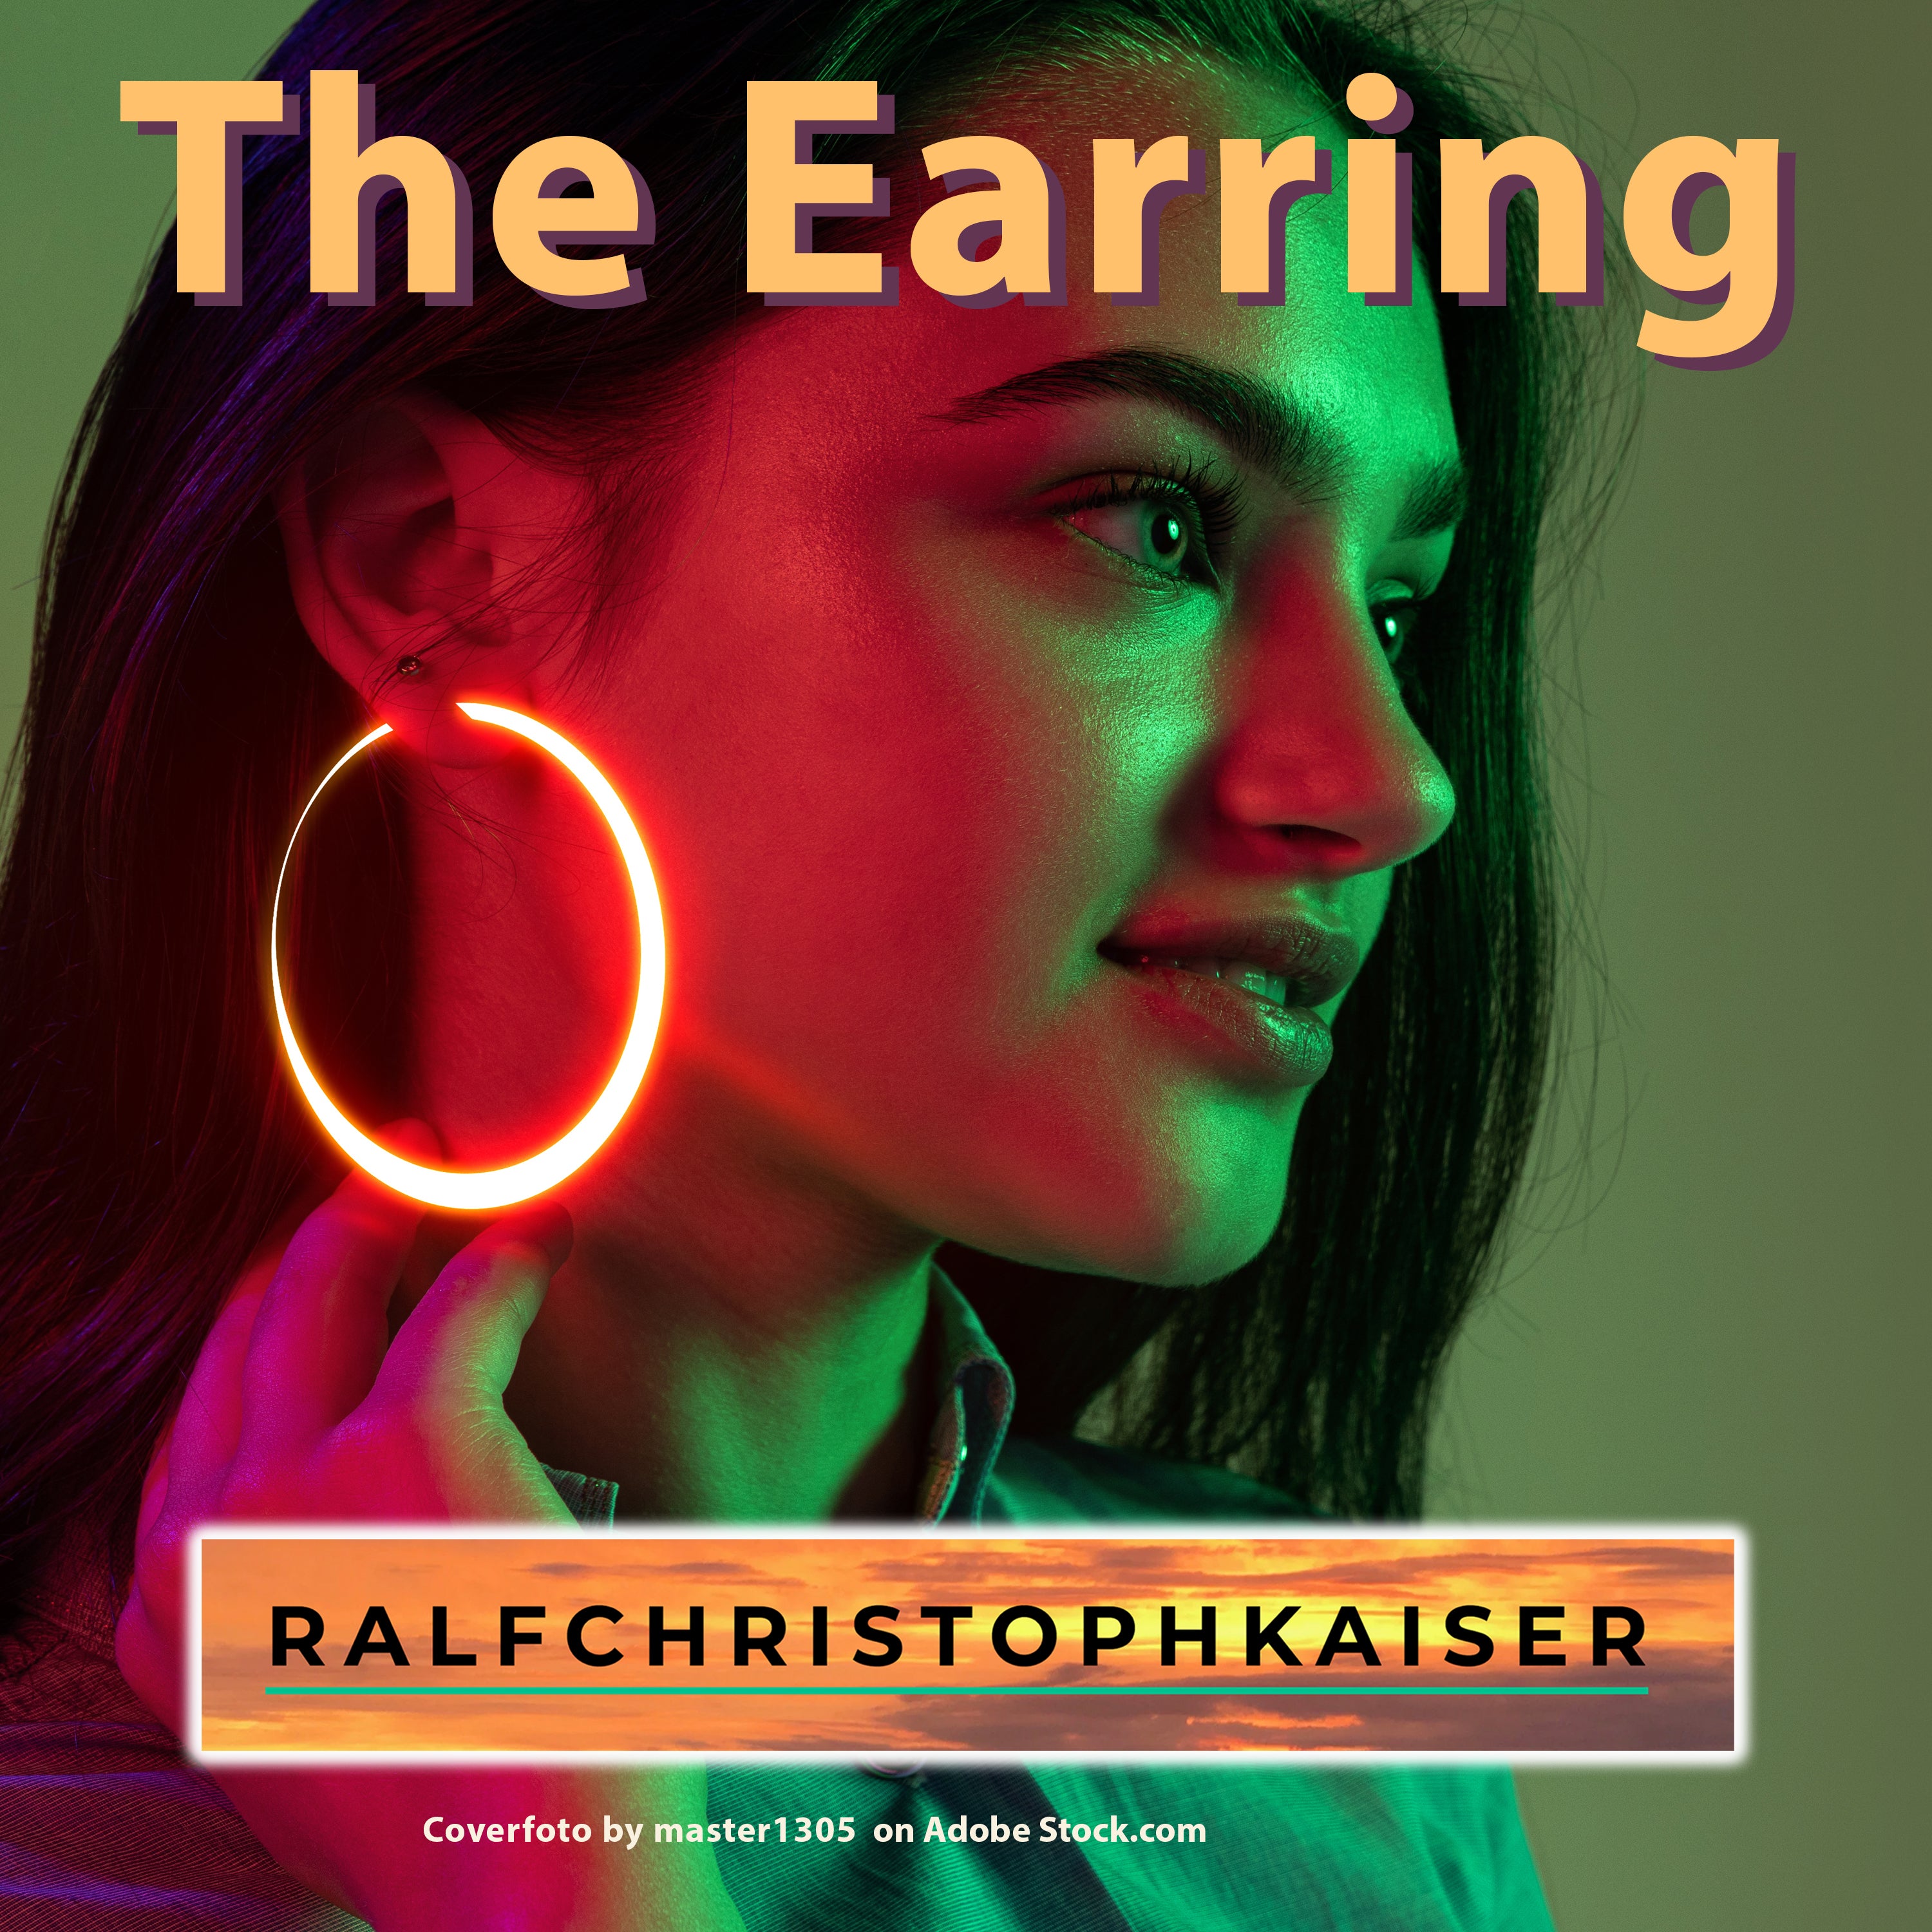 "The Earring"the new song by Ralf Christoph Kaiser now as a 32 bit 48 kHz wav file and as an mp3 for download here in the store with the lyrics as a PDF